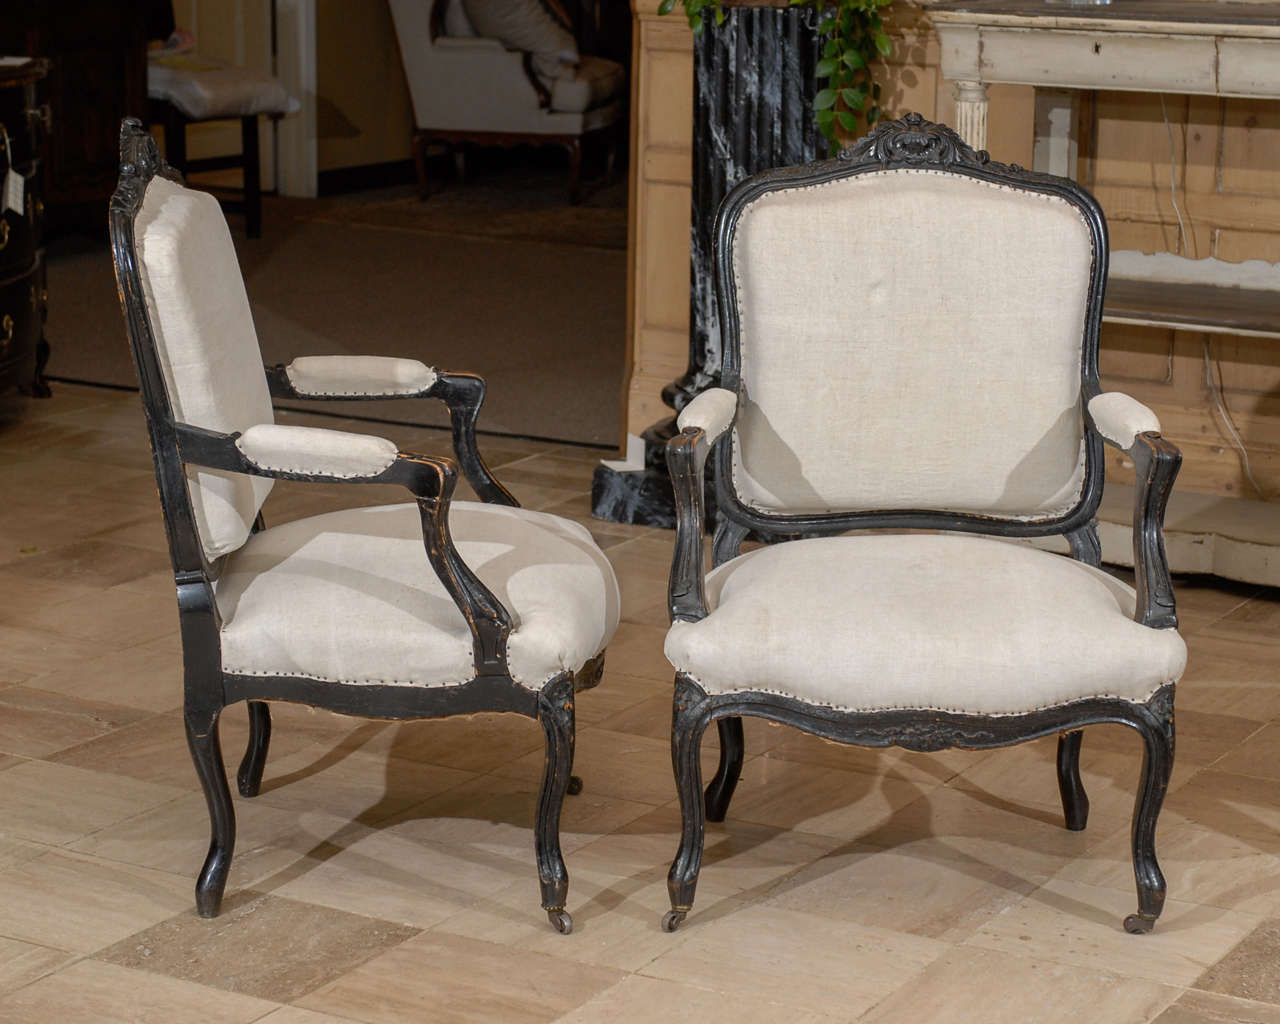 Pair of 19th Century Black Painted Louis XV style Arm Chairs, Circa 1880 For Sale 1